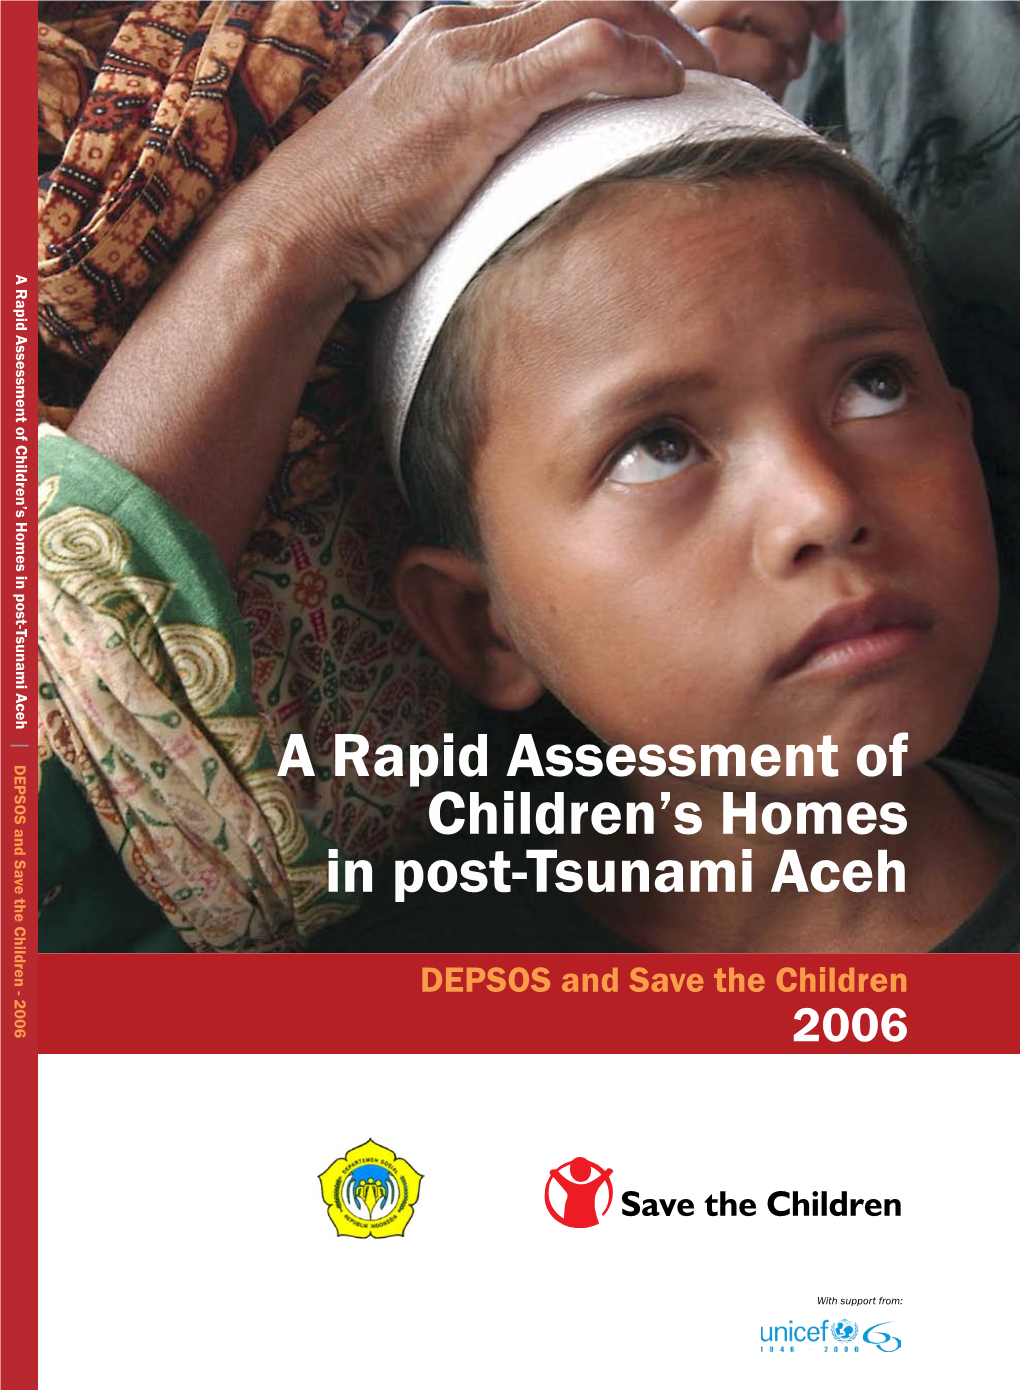 A Rapid Assessment of Children's Homes in Post-Tsunami Aceh